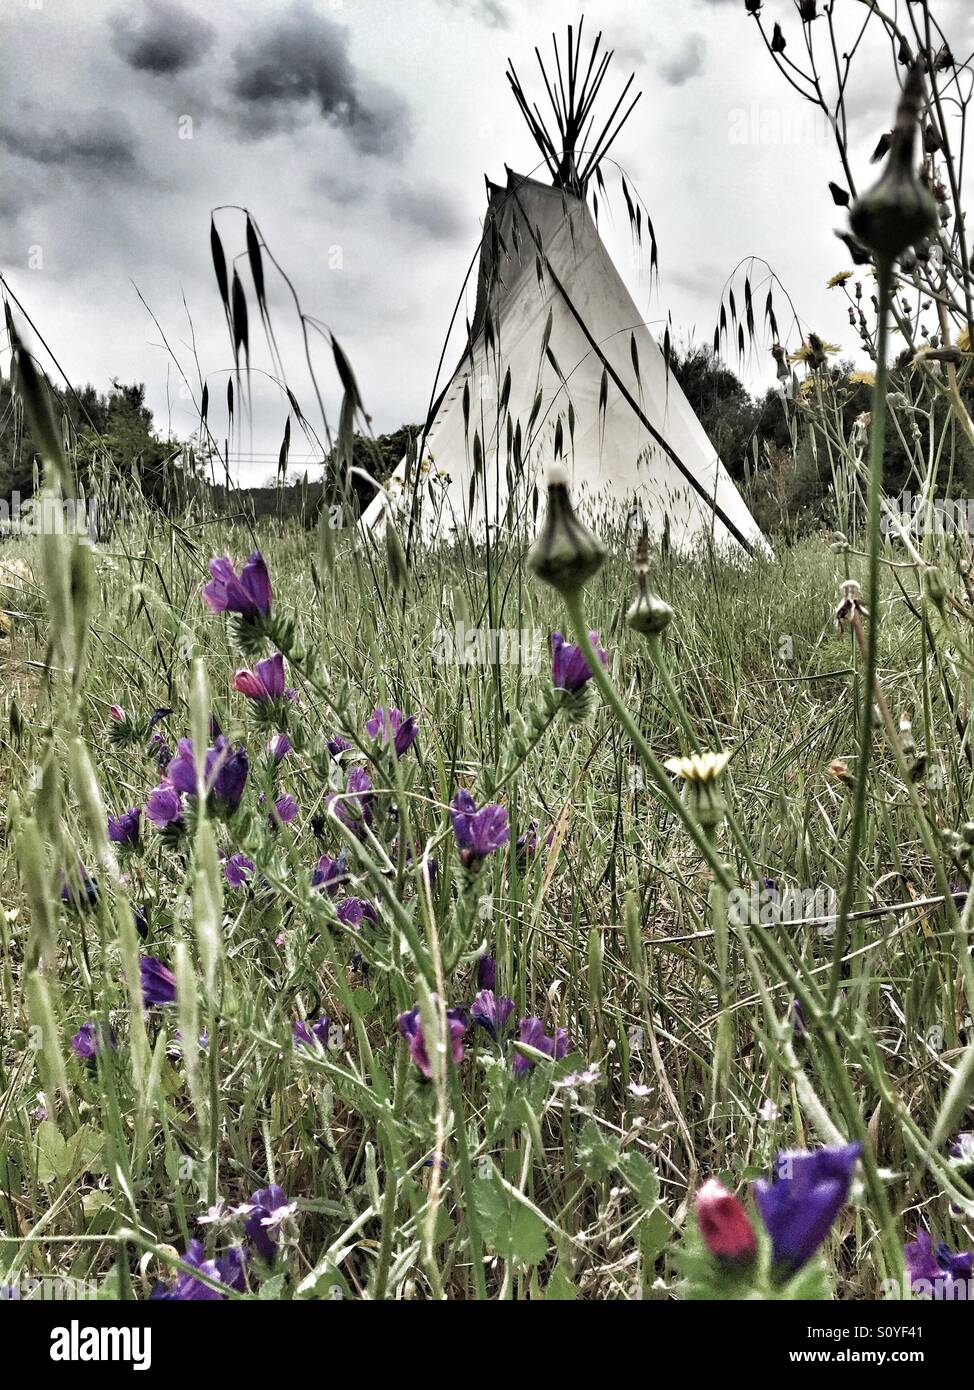 Teepee in a field Stock Photo